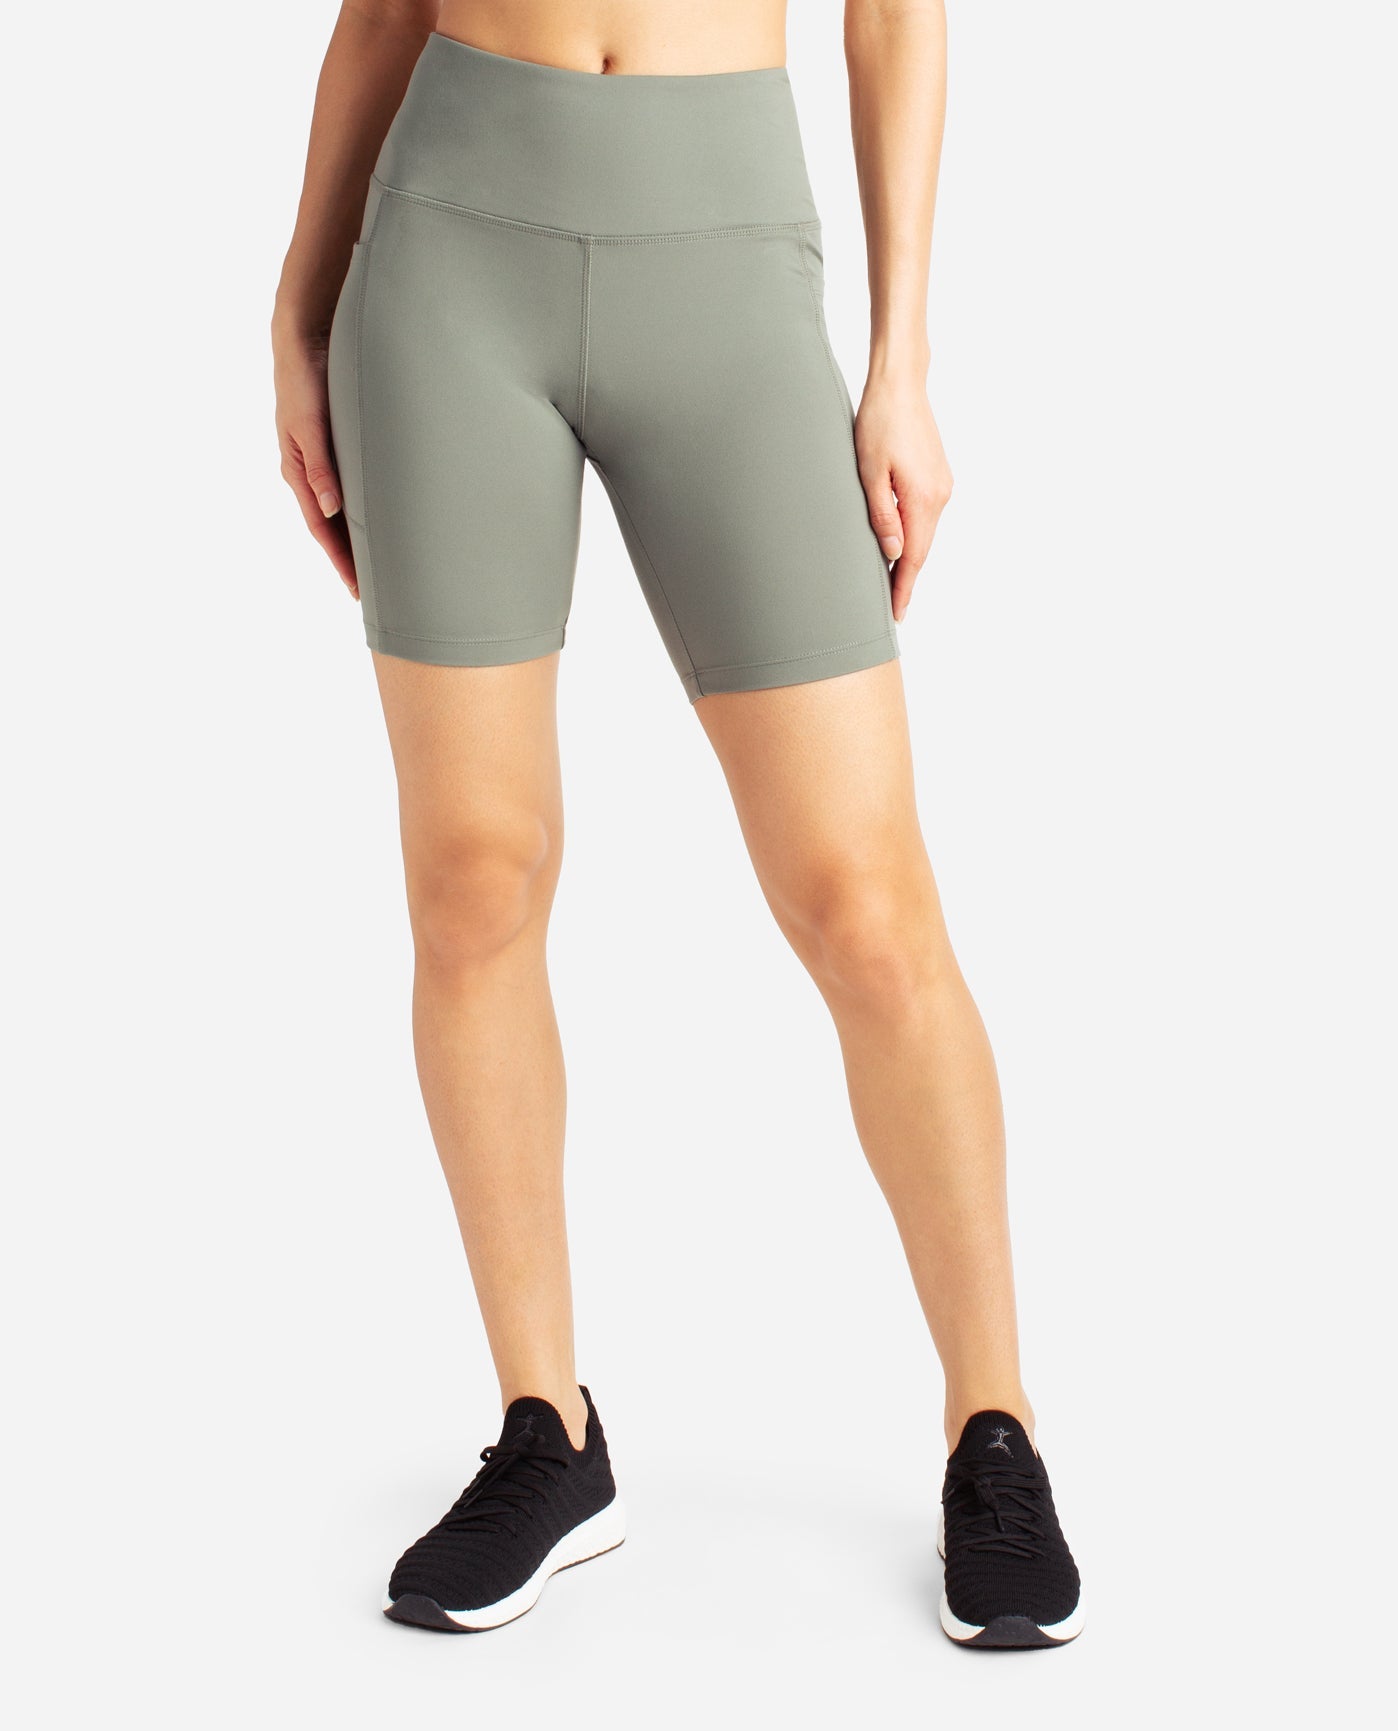 2-pack Danskin Ladies' Bike Shorts are at Costco! 🤩 These have a